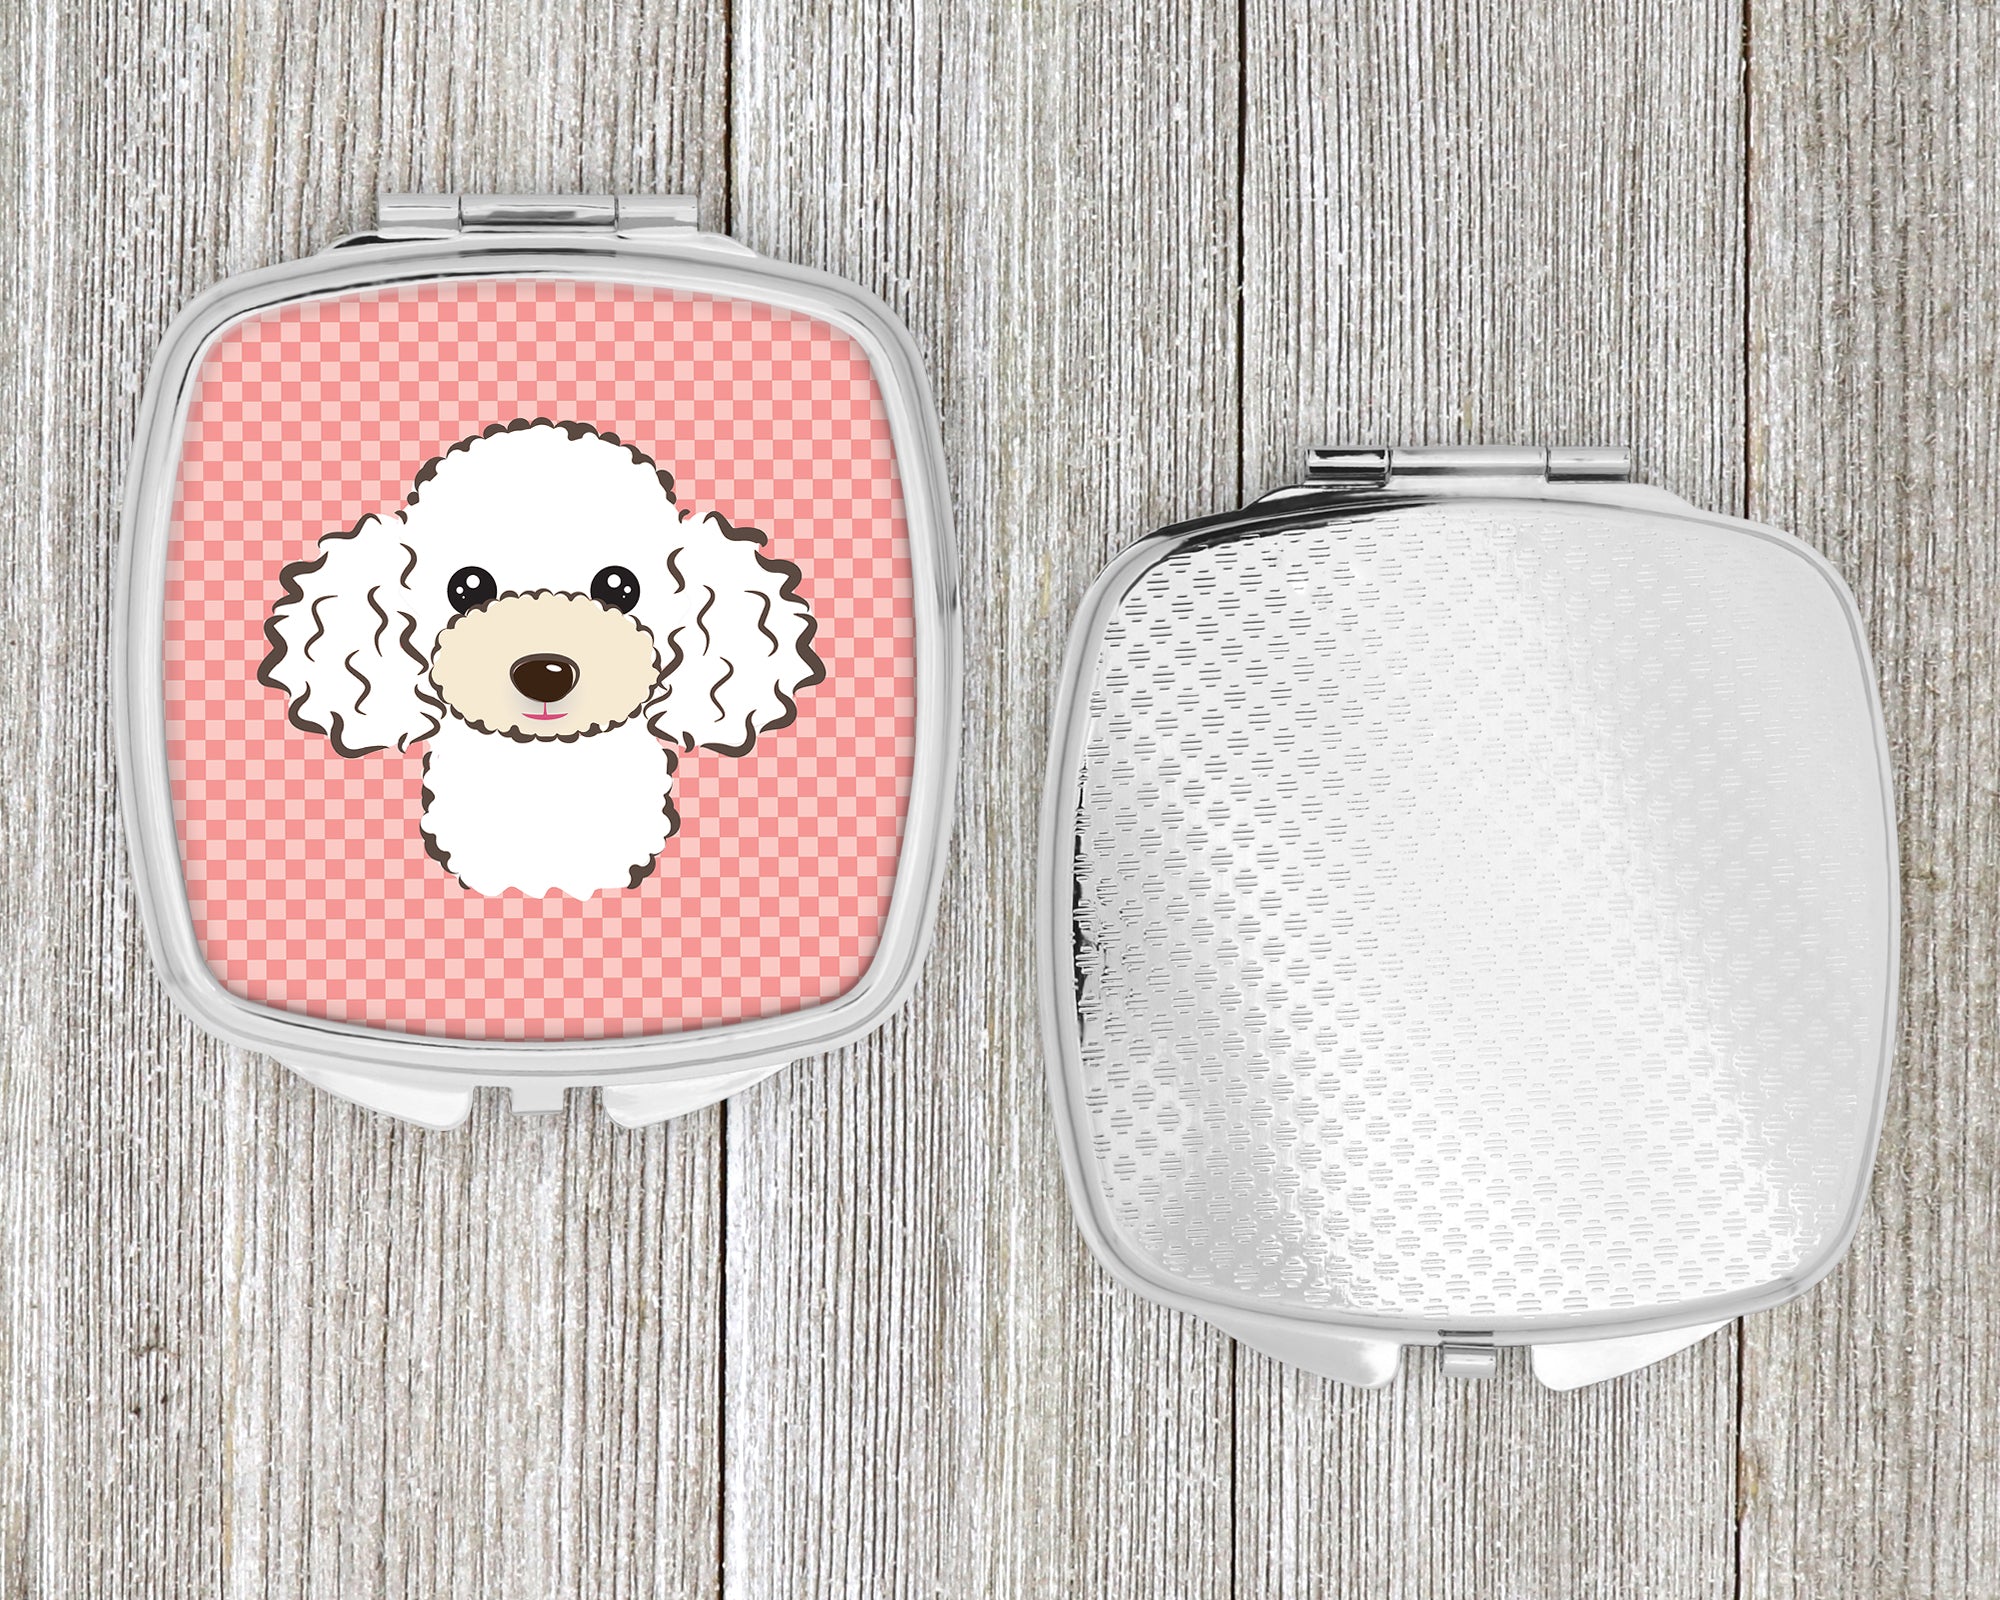 Checkerboard Pink White Poodle Compact Mirror BB1257SCM  the-store.com.